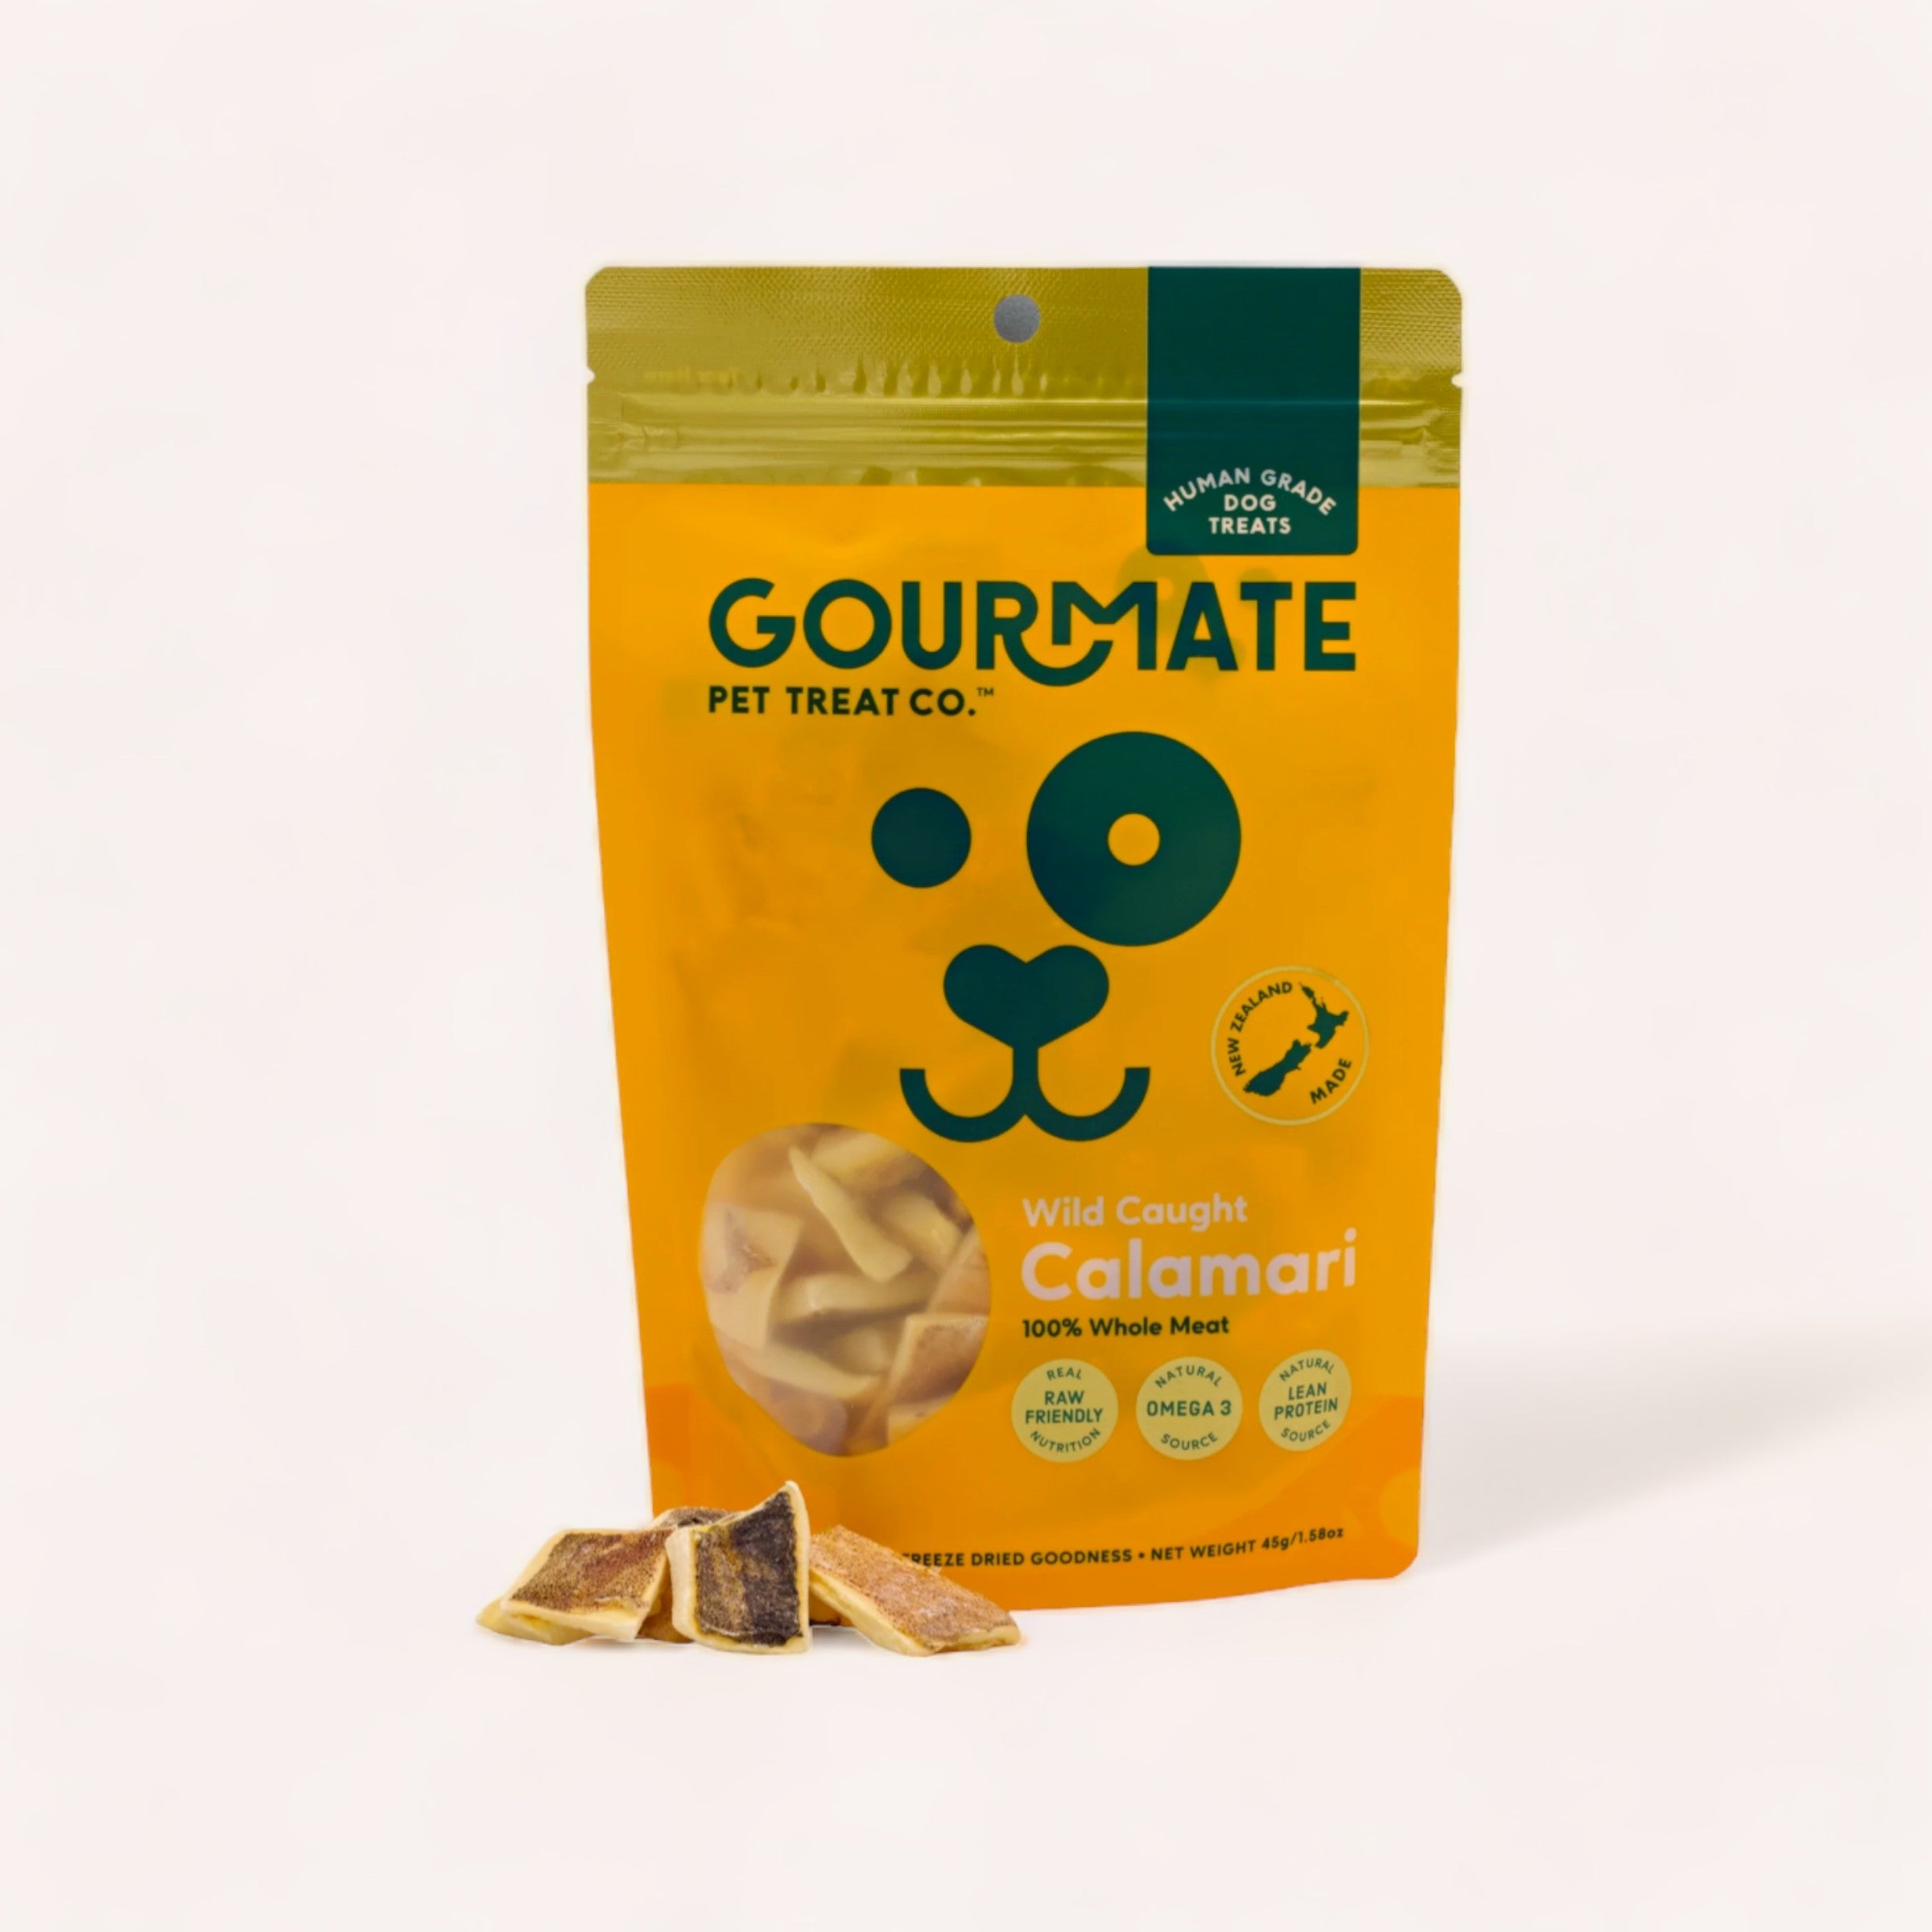 A package of "Calamari Treats by Gourmate" dog treats against a white background.